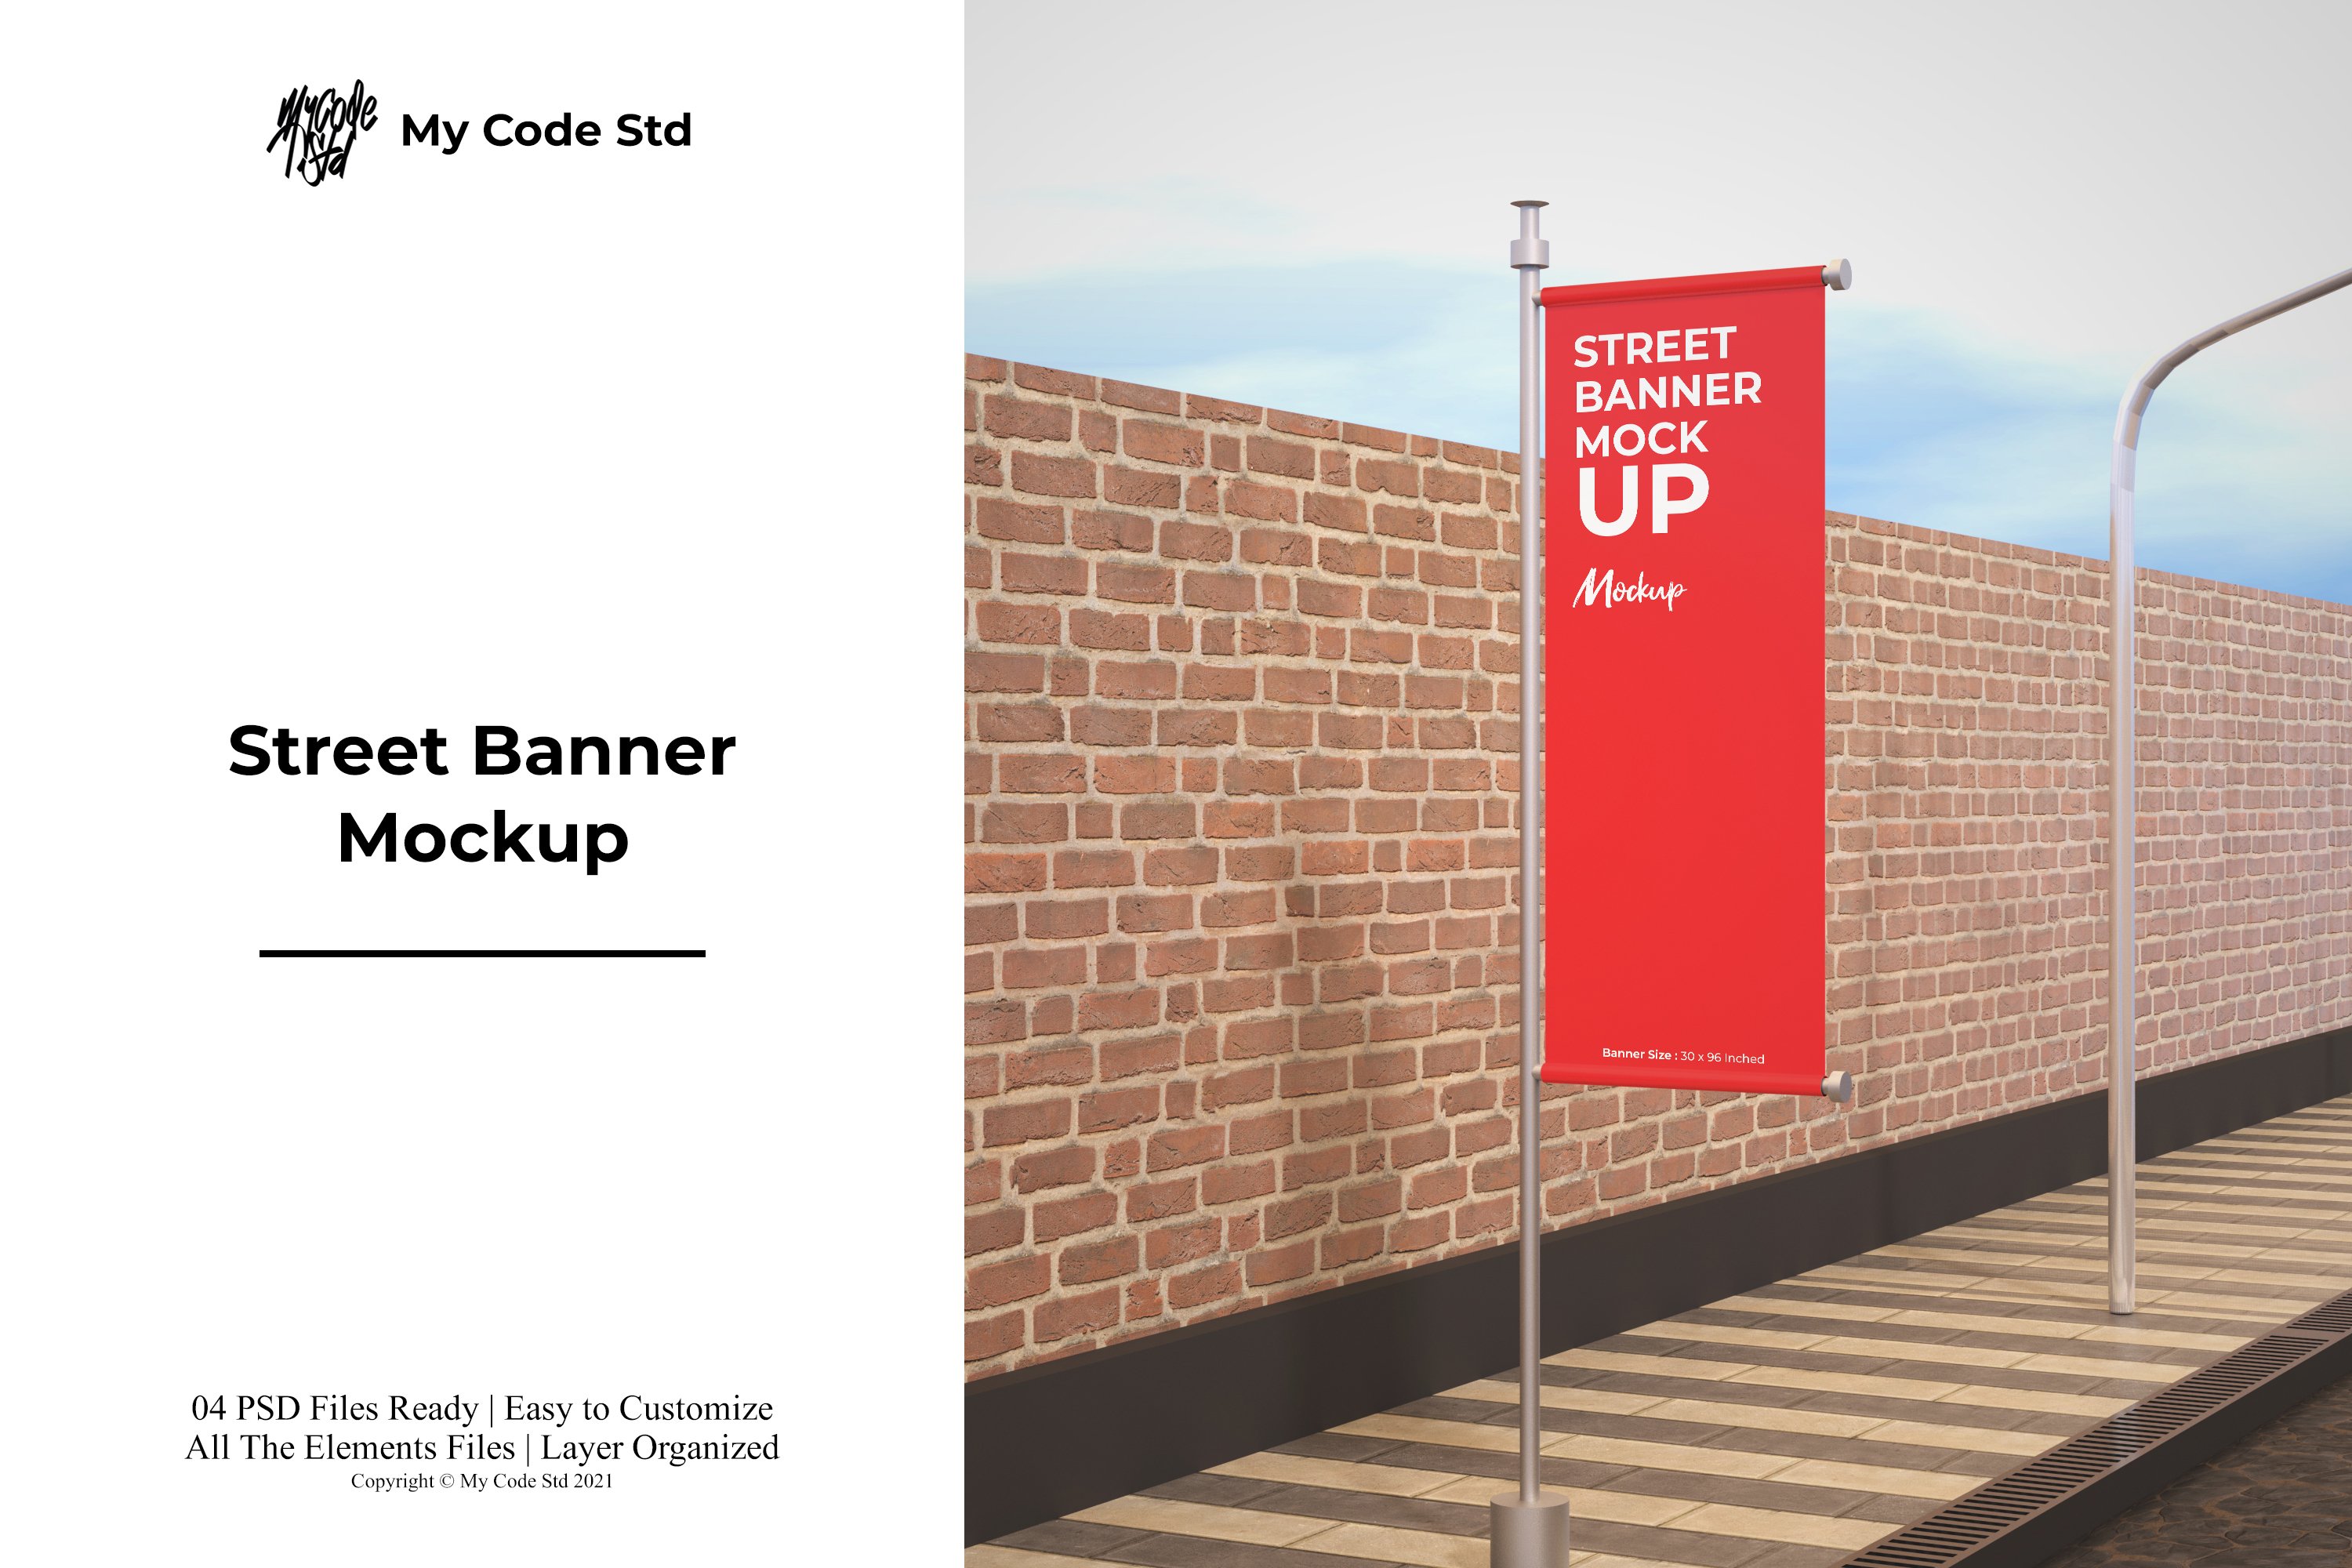 Realistic Street Banner Mockup cover image.